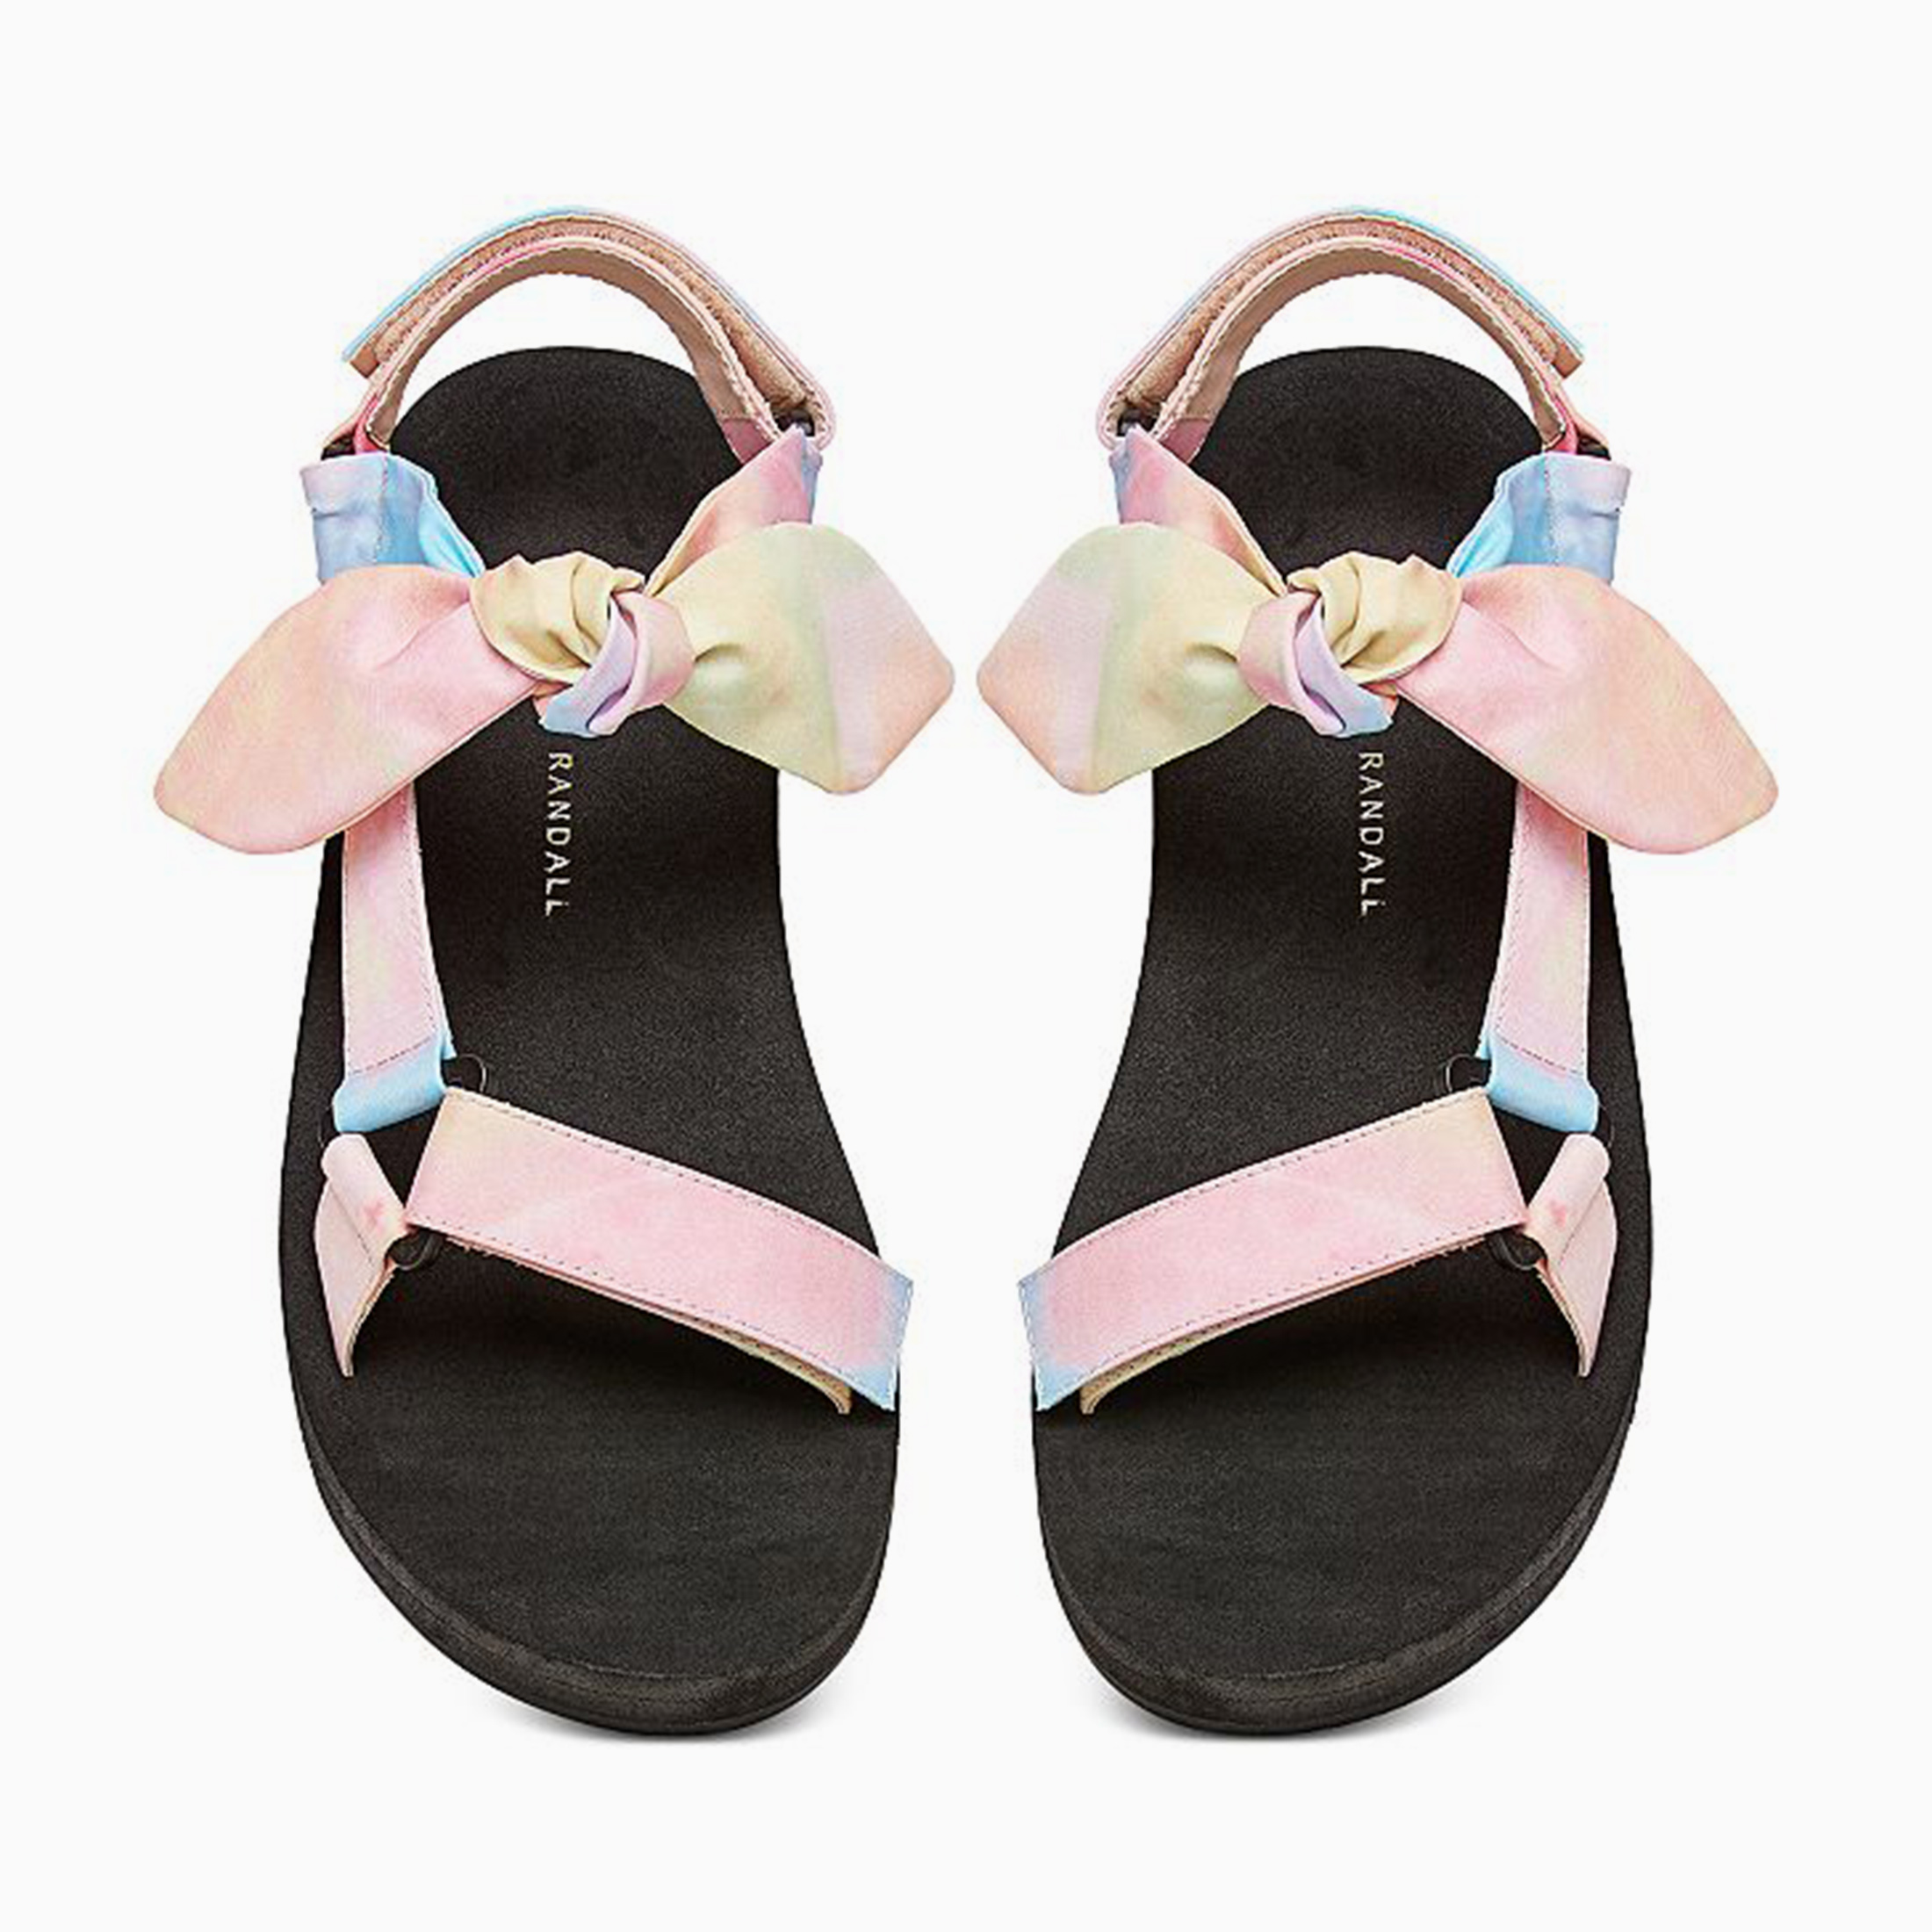 Chanel Velcro Sandals: the Rogue Shoe Everyone Is Wearing